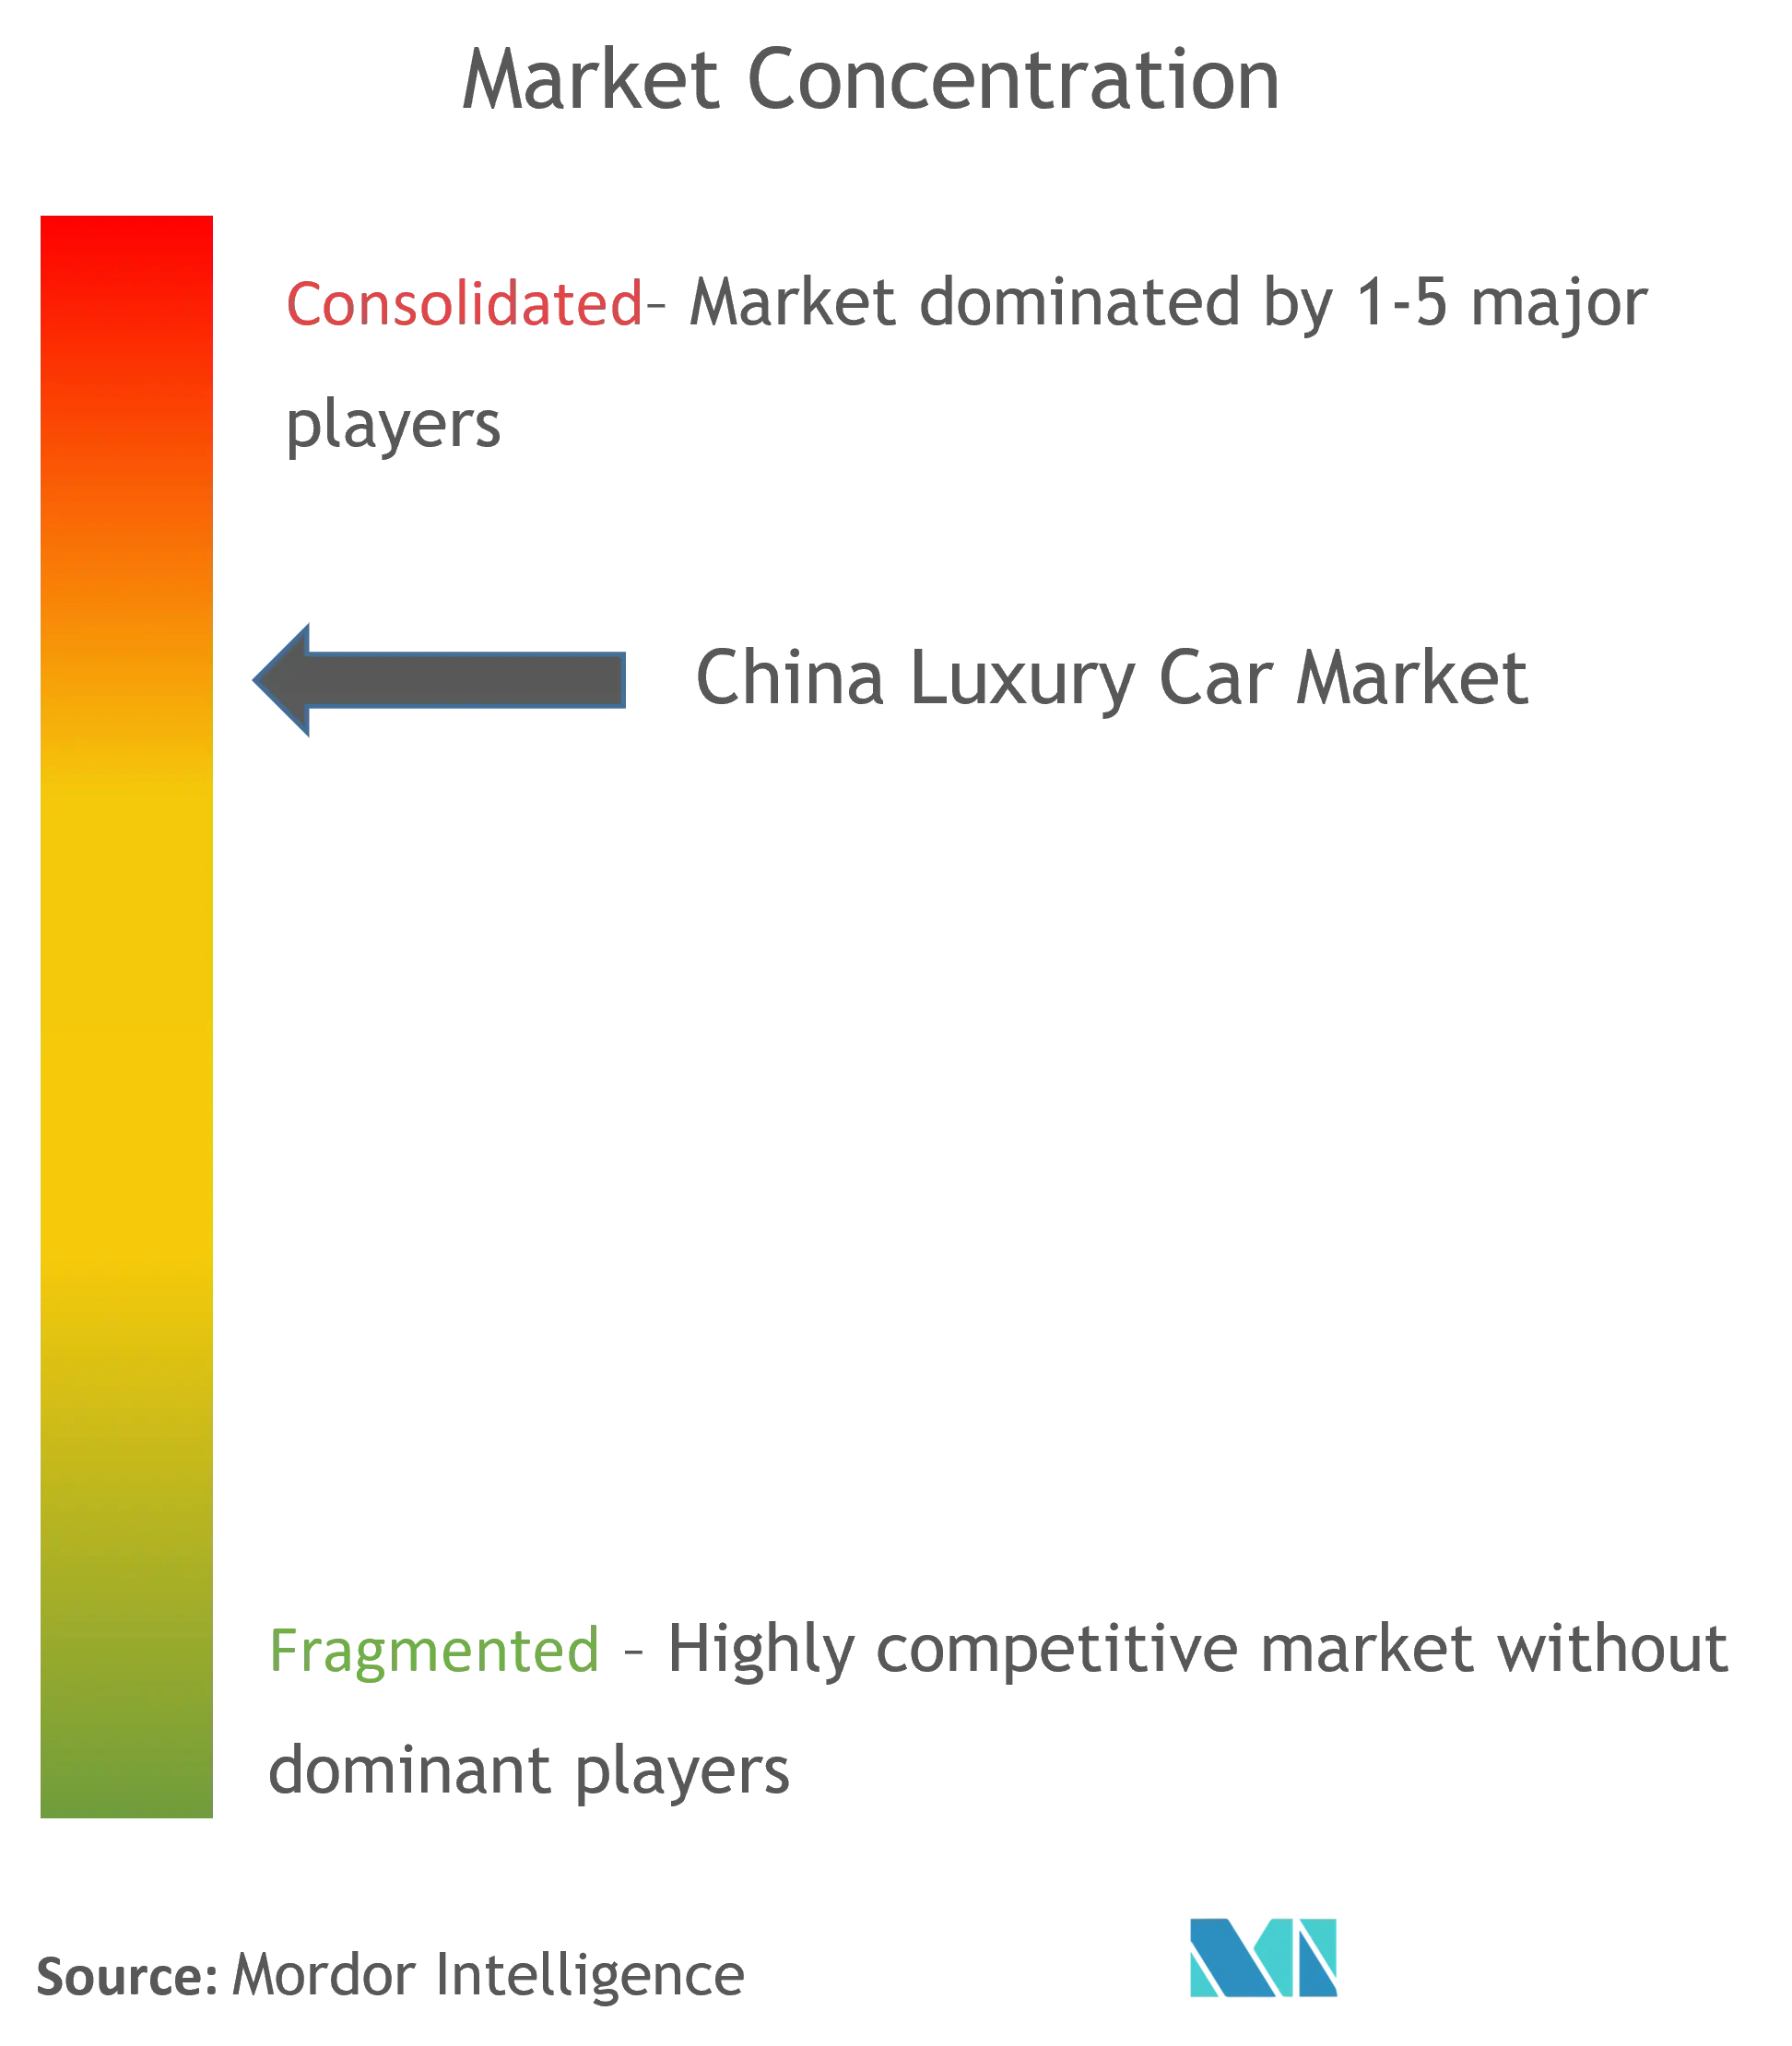 China Luxury Car Market Concentration